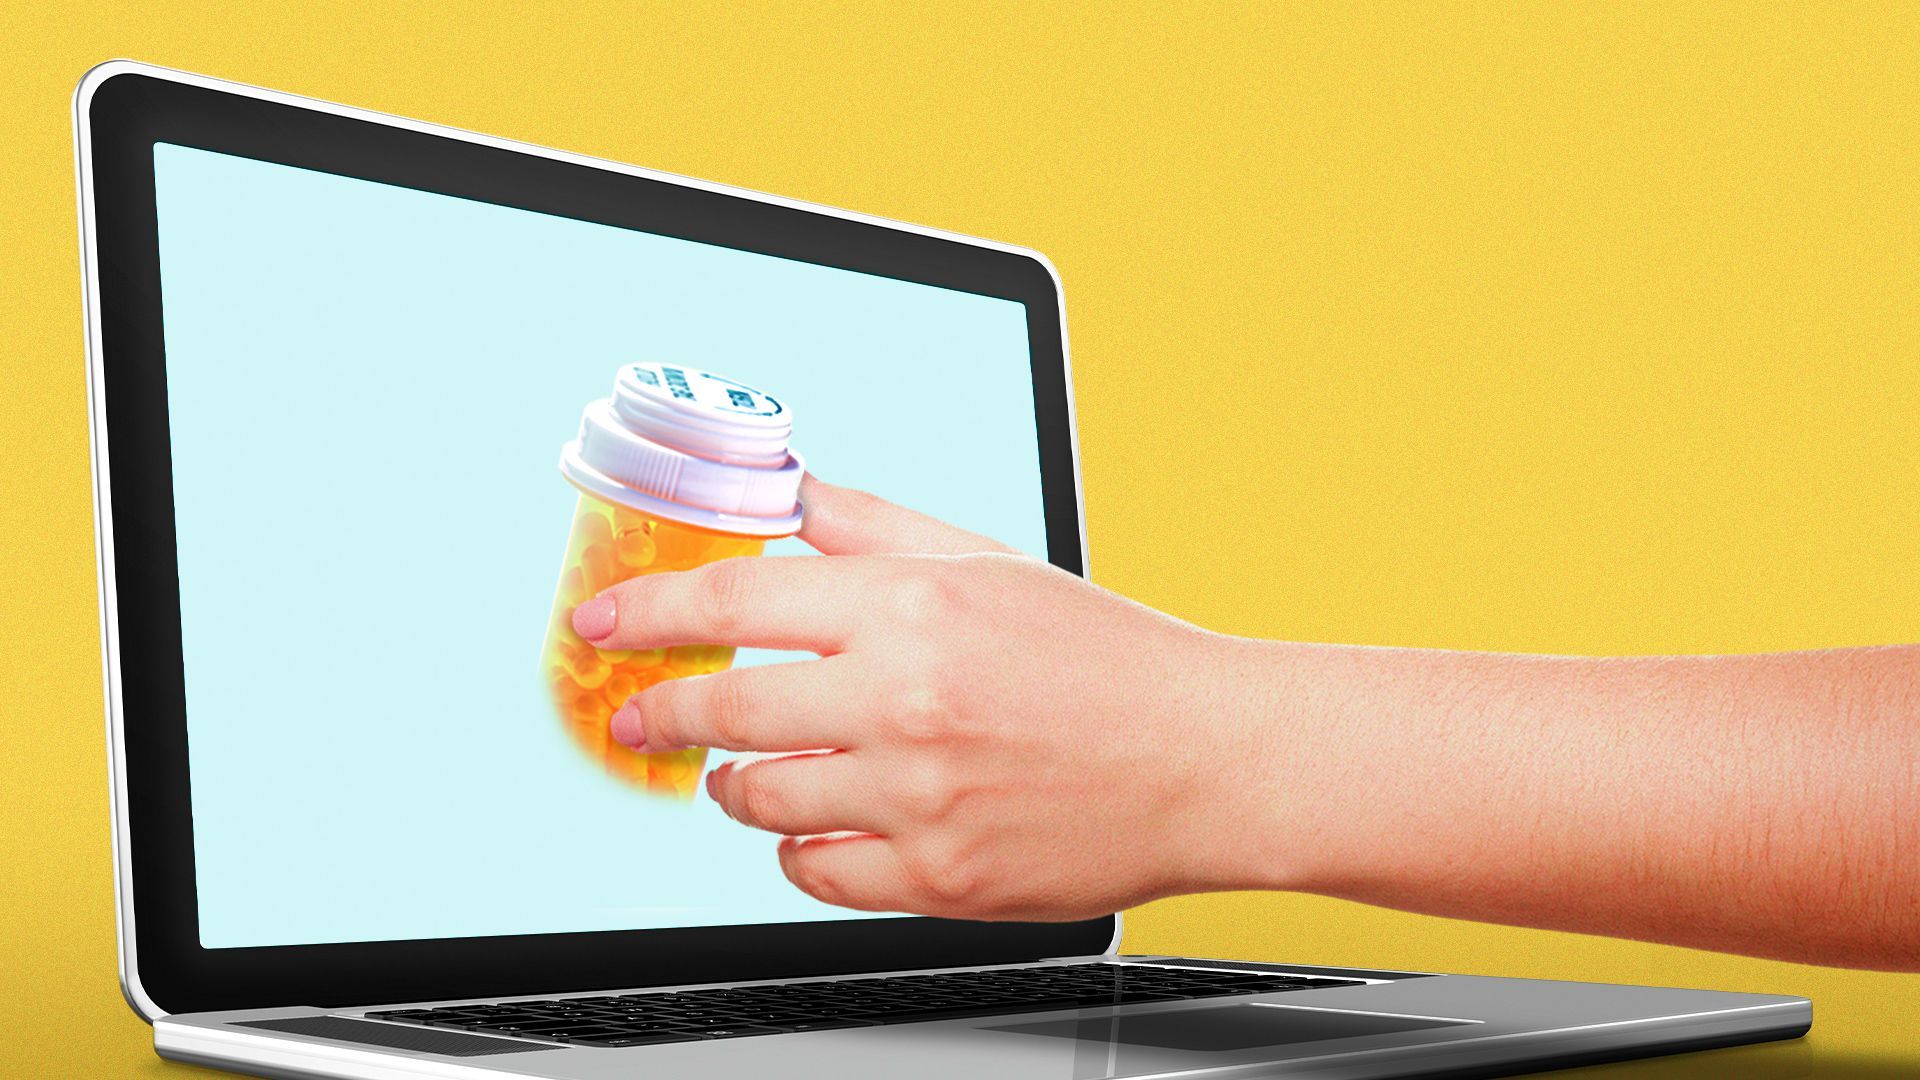 Illustration of a hand pulling a 3D bottle of pills from a laptop screen.